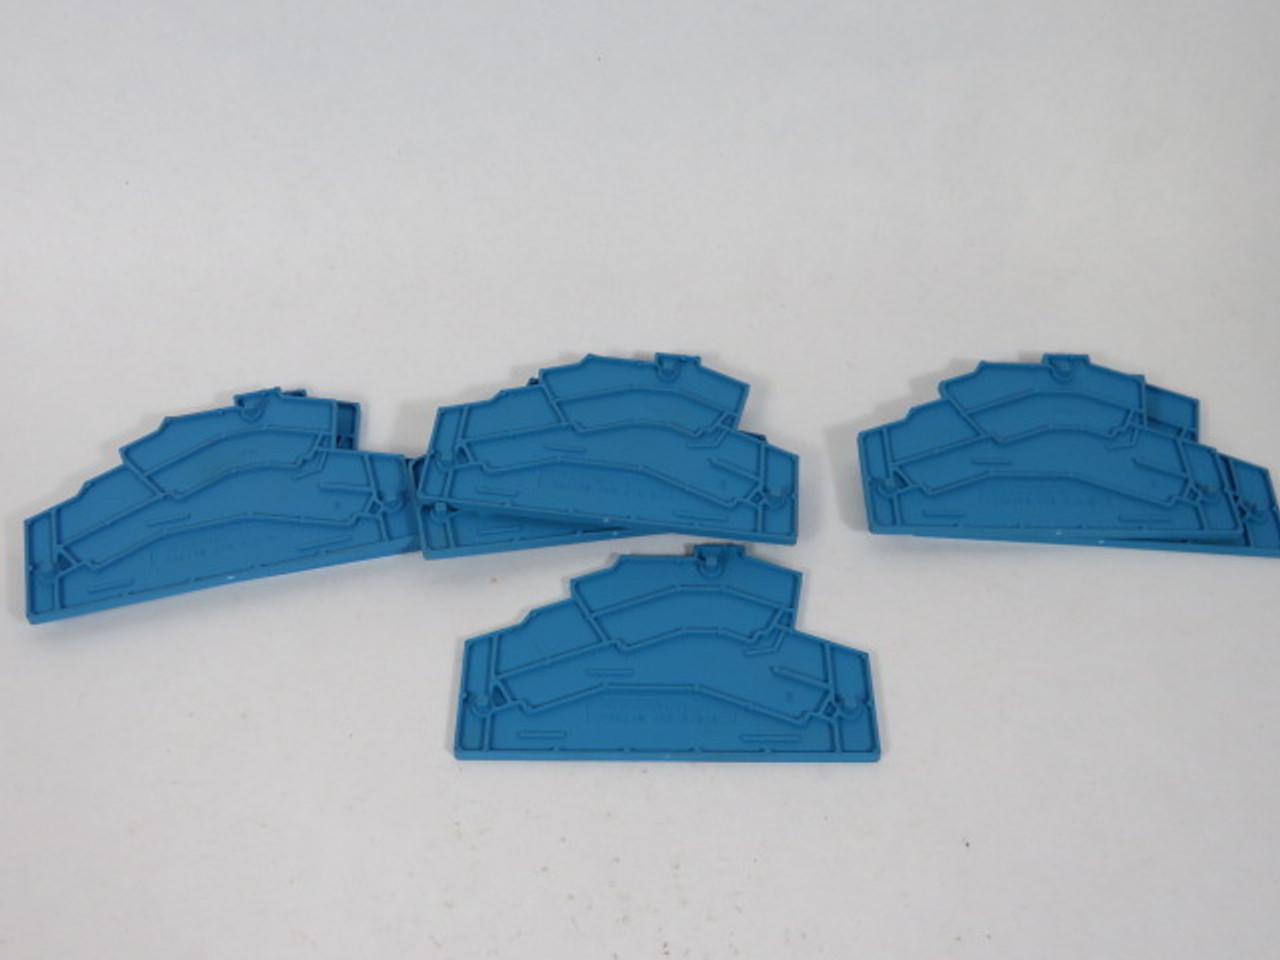 Weidmuller ZAP/TW-ZDK-2.5-2 Terminal Block End Plate Lot of 7 BLUE USED